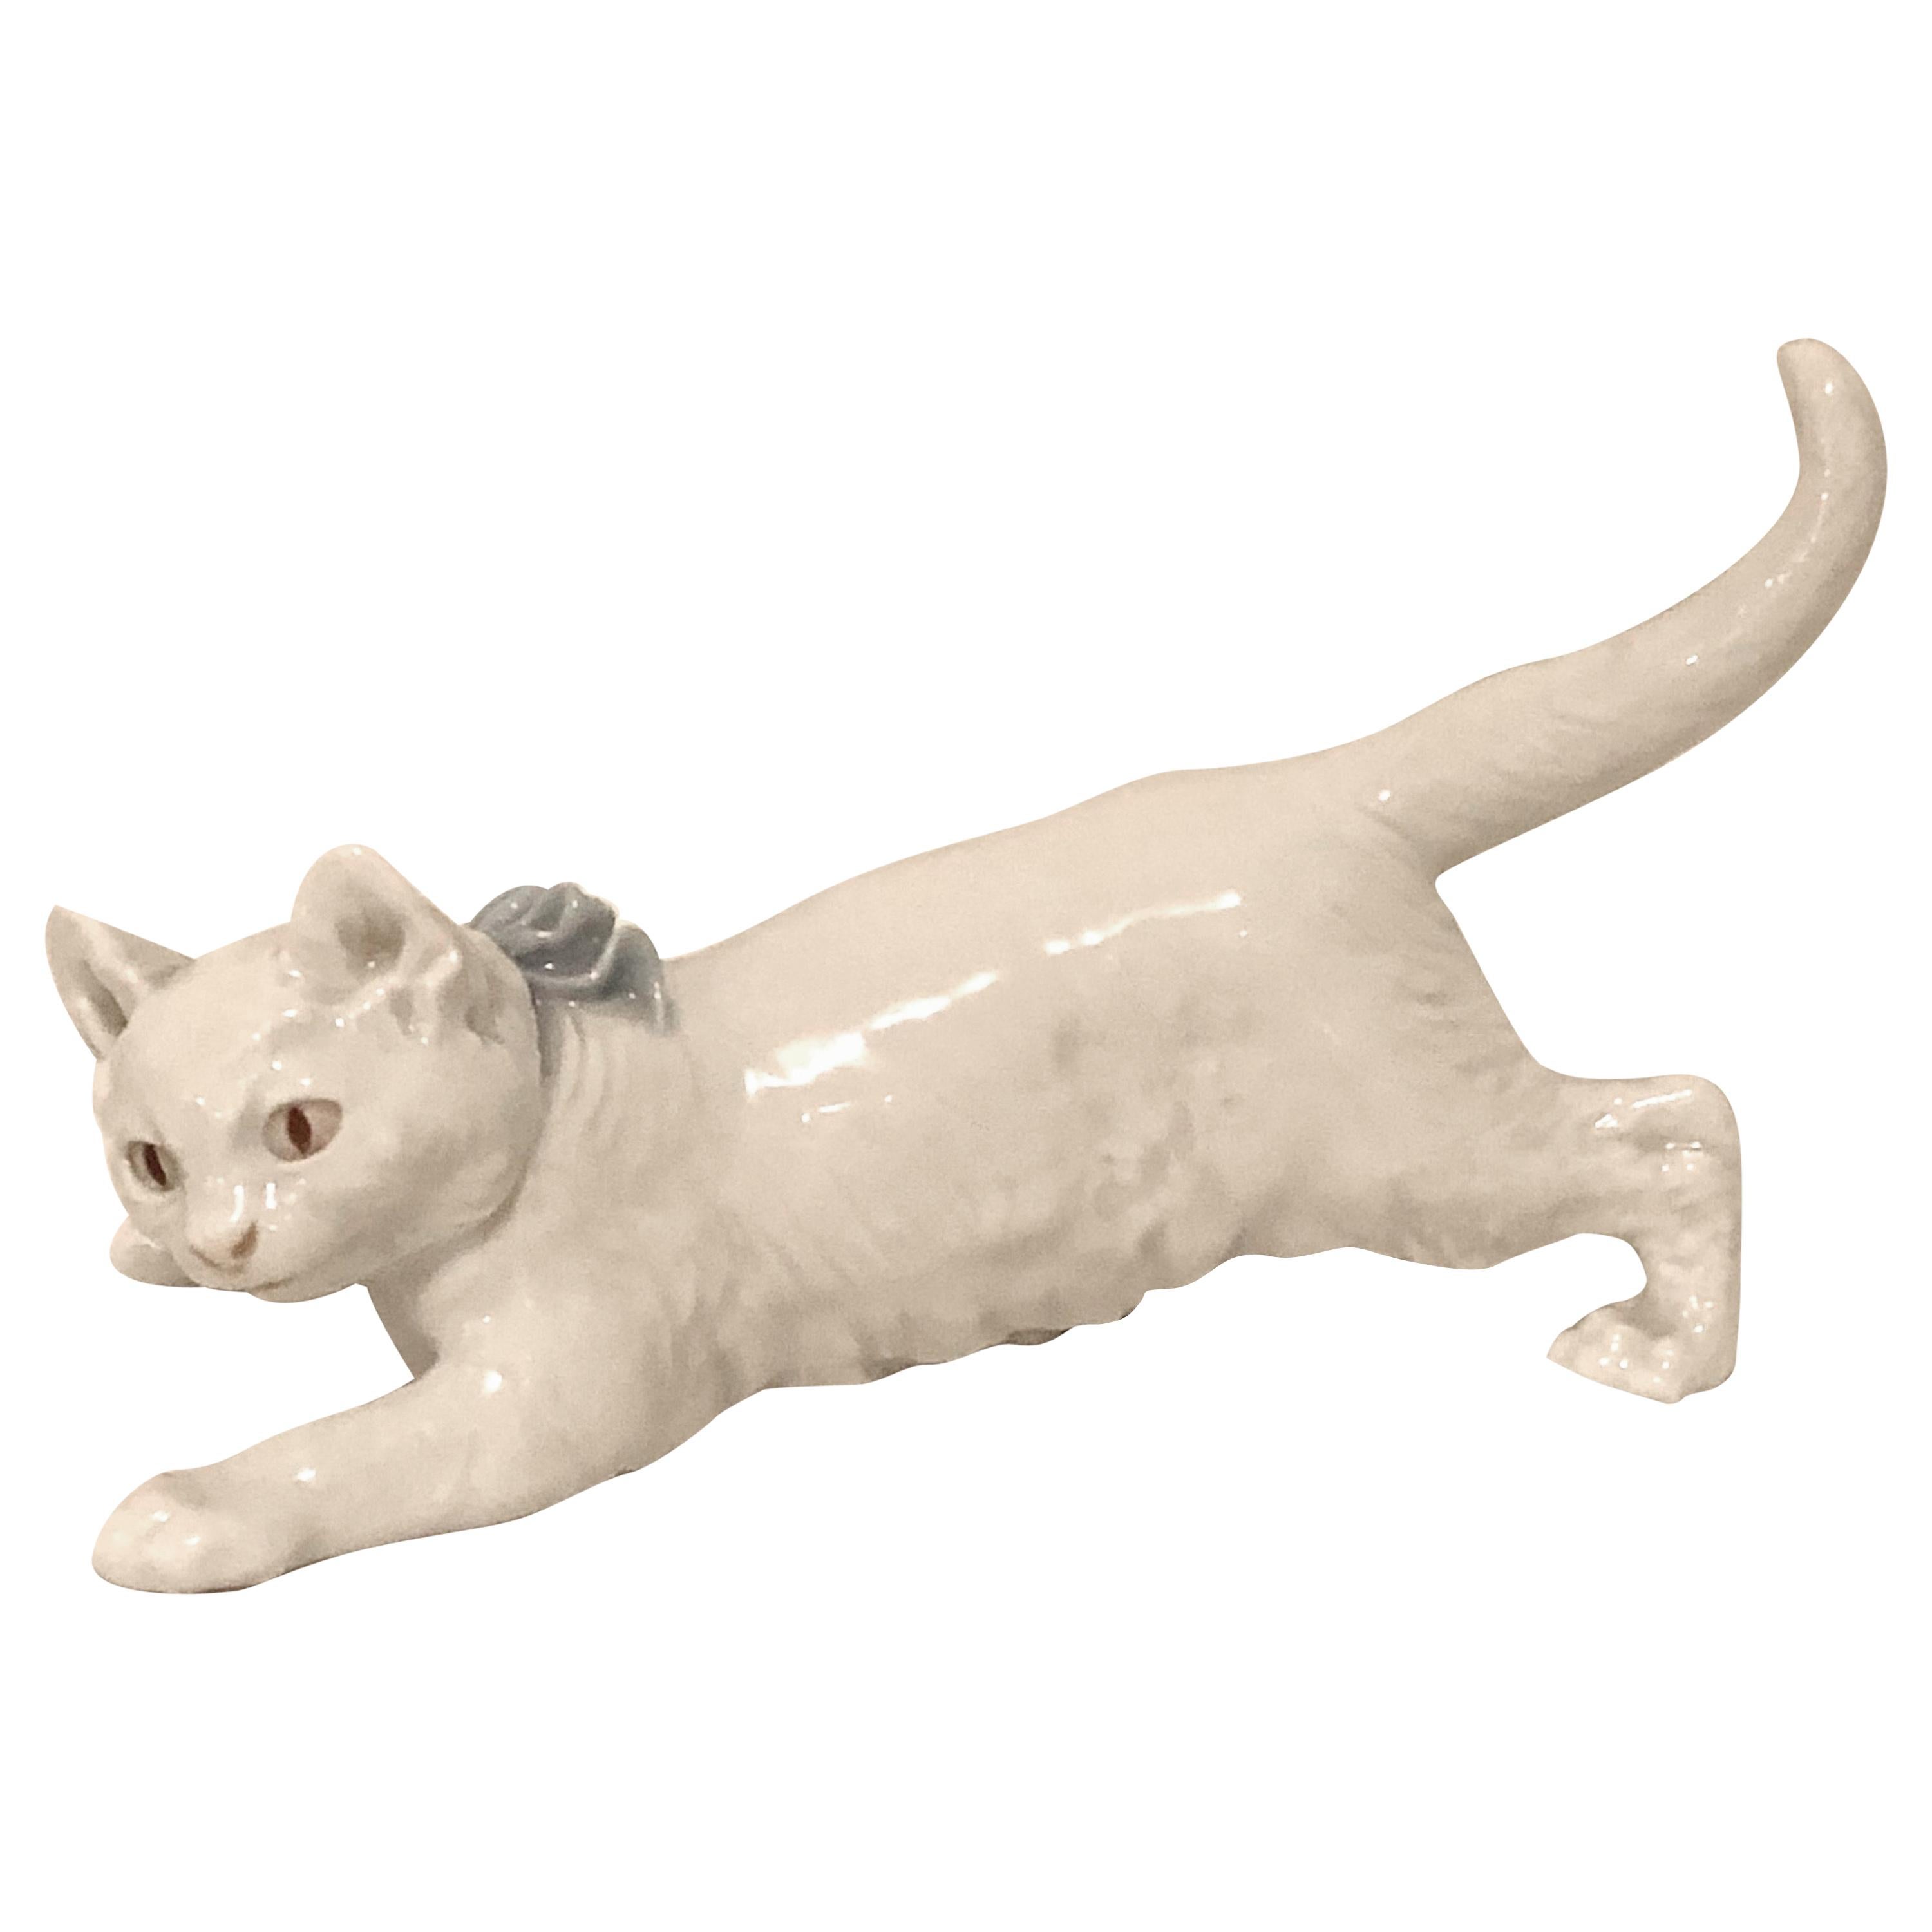 Charming Meissen Figure of a Finely Modeled White Cat with a Blue Bow